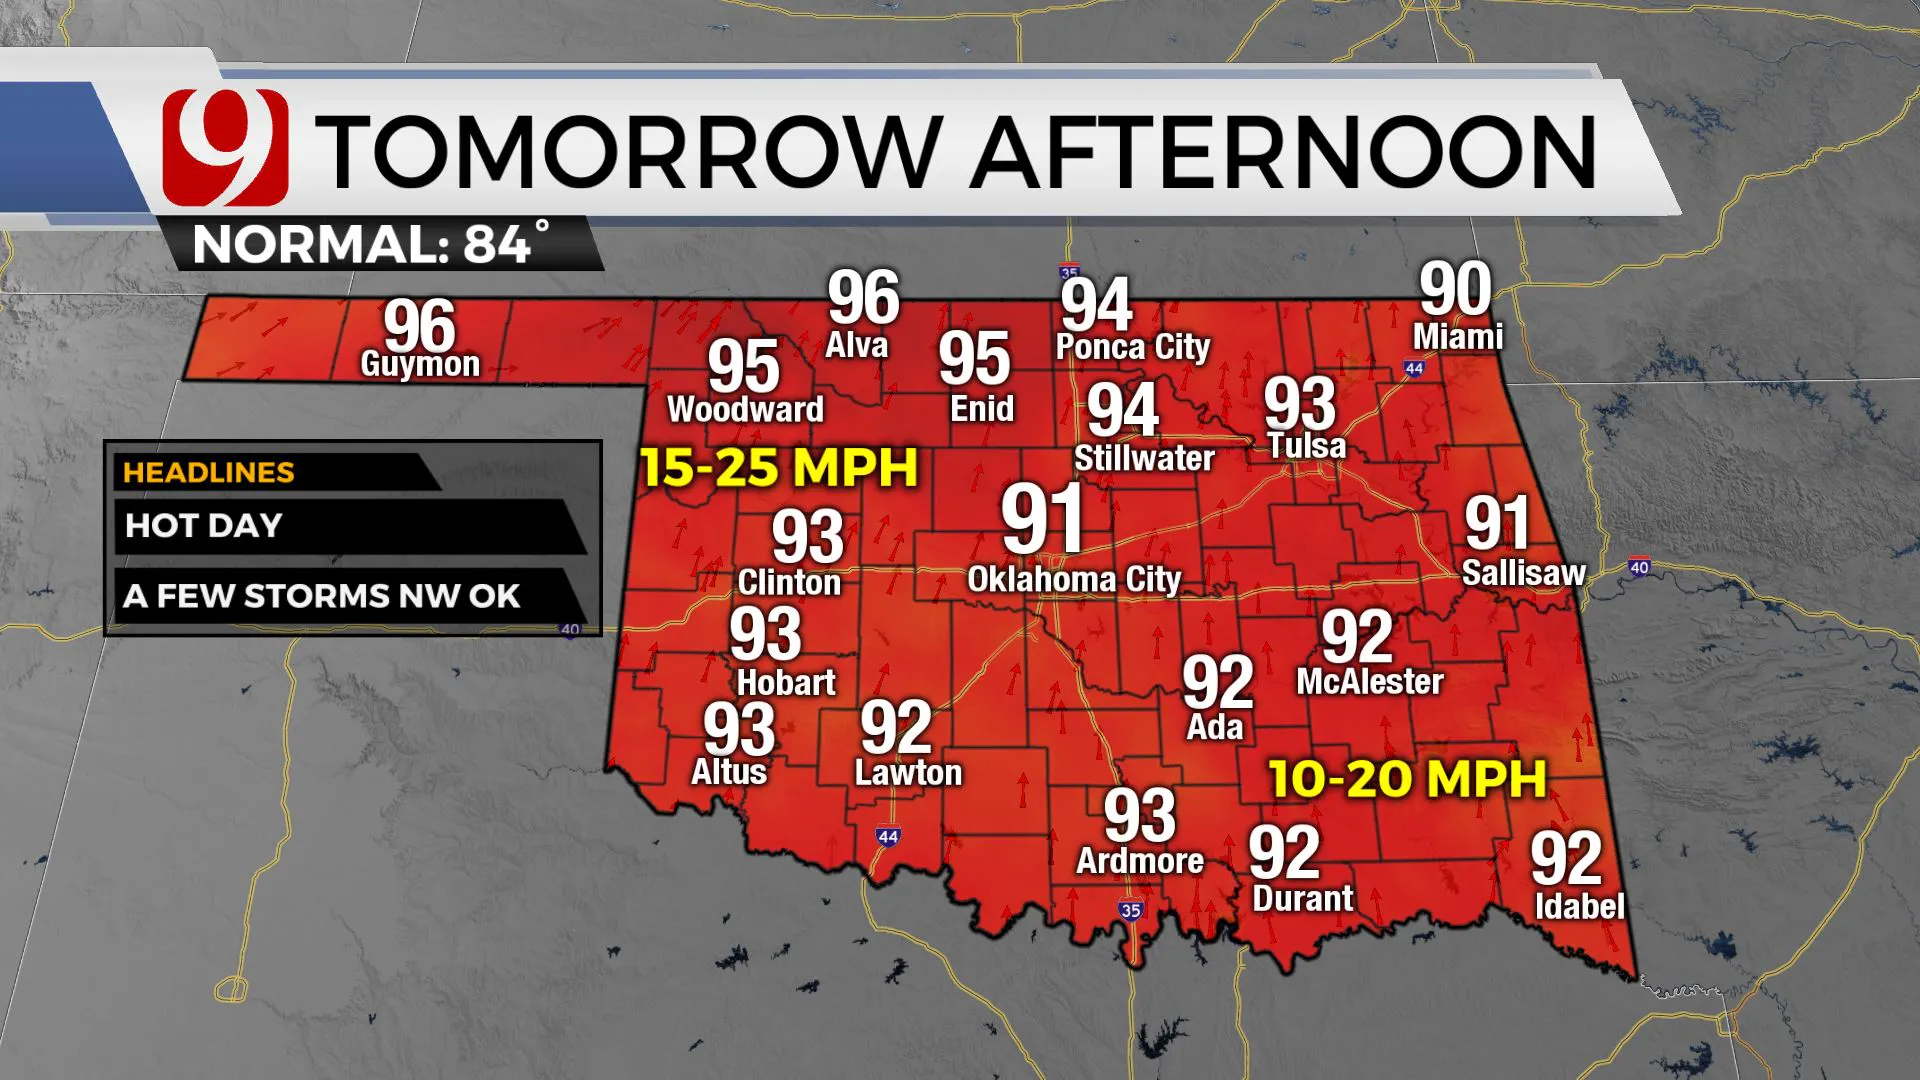 Temps tomorrow afternoon.